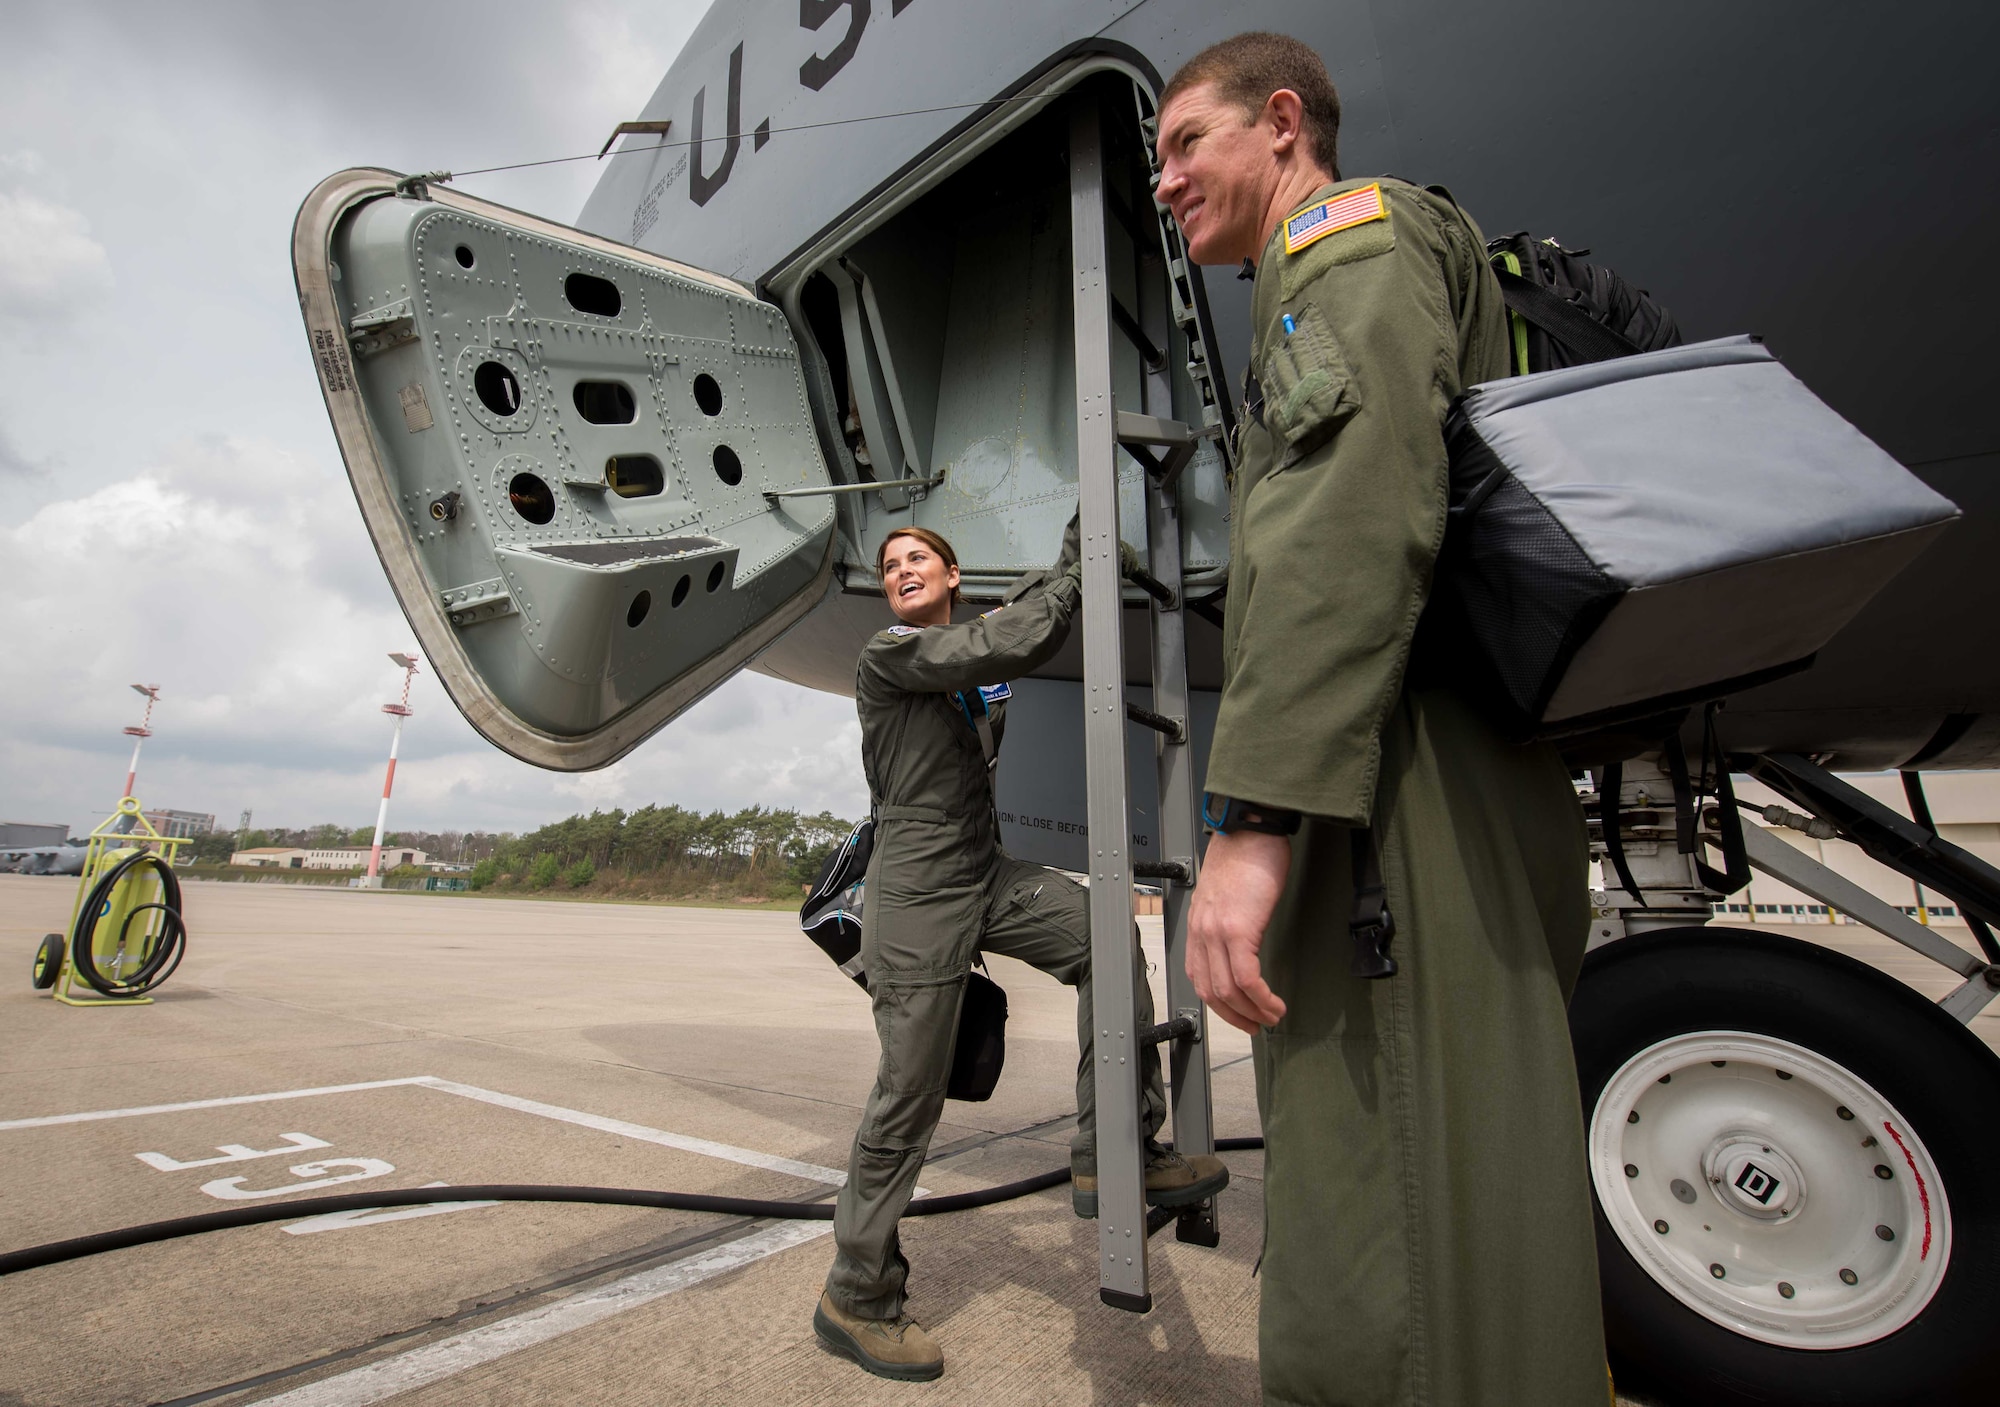 Senior Airman Luke Walter, 86th Aeromedical Evacuation Squadron technician, prepares to board a KC-135 Stratotanker during a patient movement exercise on Ramstein Air Base, May 4, 2017. The 86th AES practiced transporting simulated patients on a KC-135 because most participants were relatively unfamiliar with the airframe. Practicing on unfamiliar airframes ensures that personnel are competent to transport patients no matter what airframe is available at the time. (U.S. Air Force photo by Senior Airman Elizabeth Baker/Released)